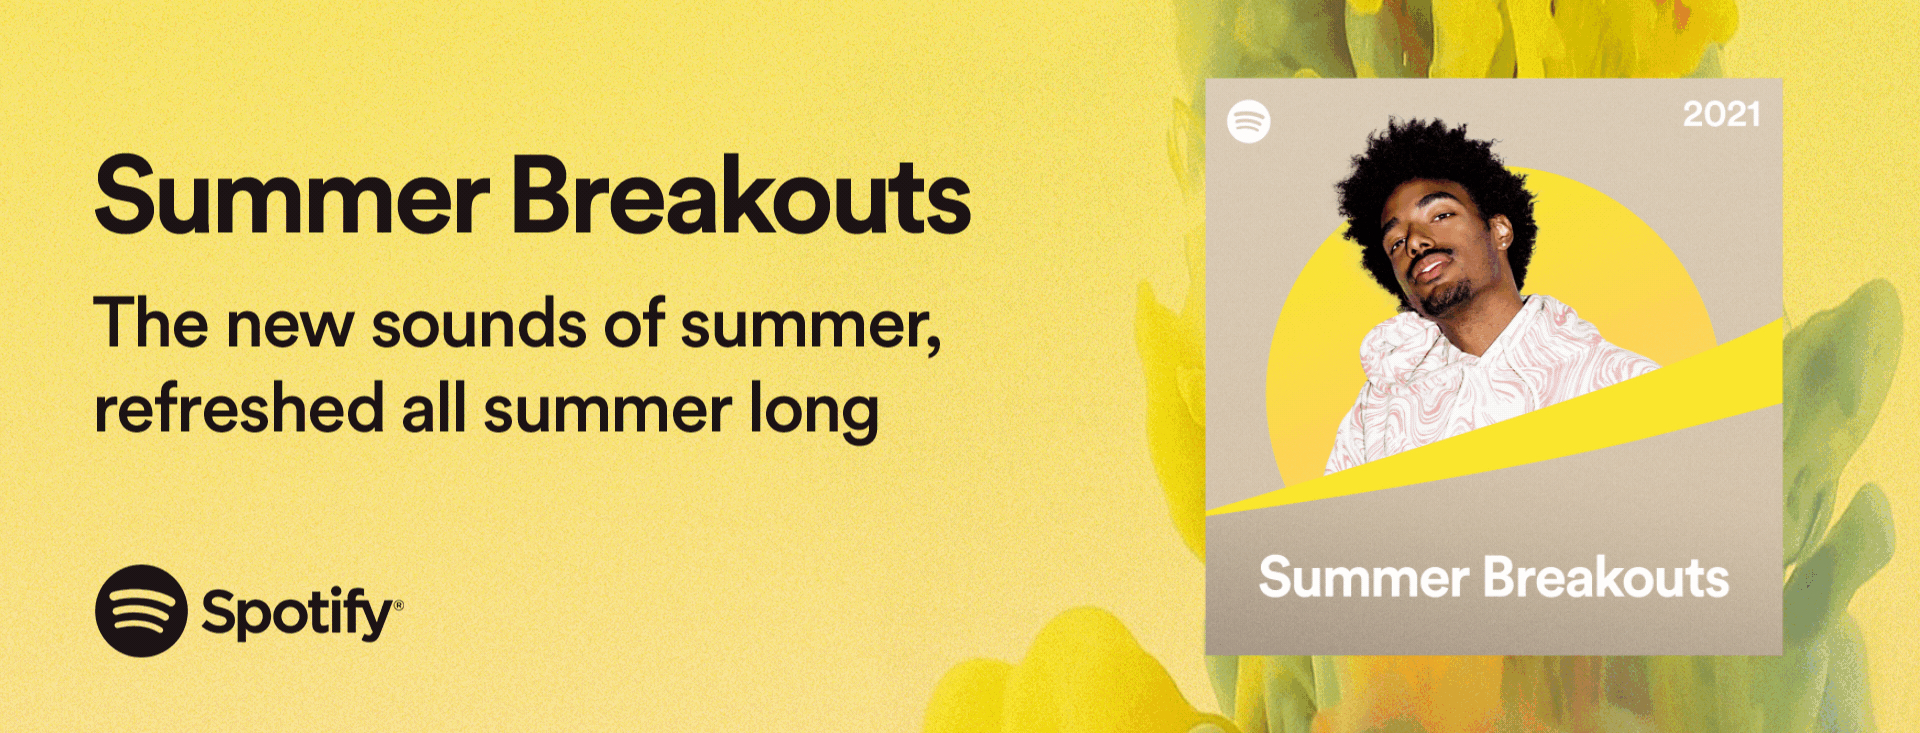 Spotify’s new Summer Breakouts playlist features the artists and songs likely to pull in big numbers this summer